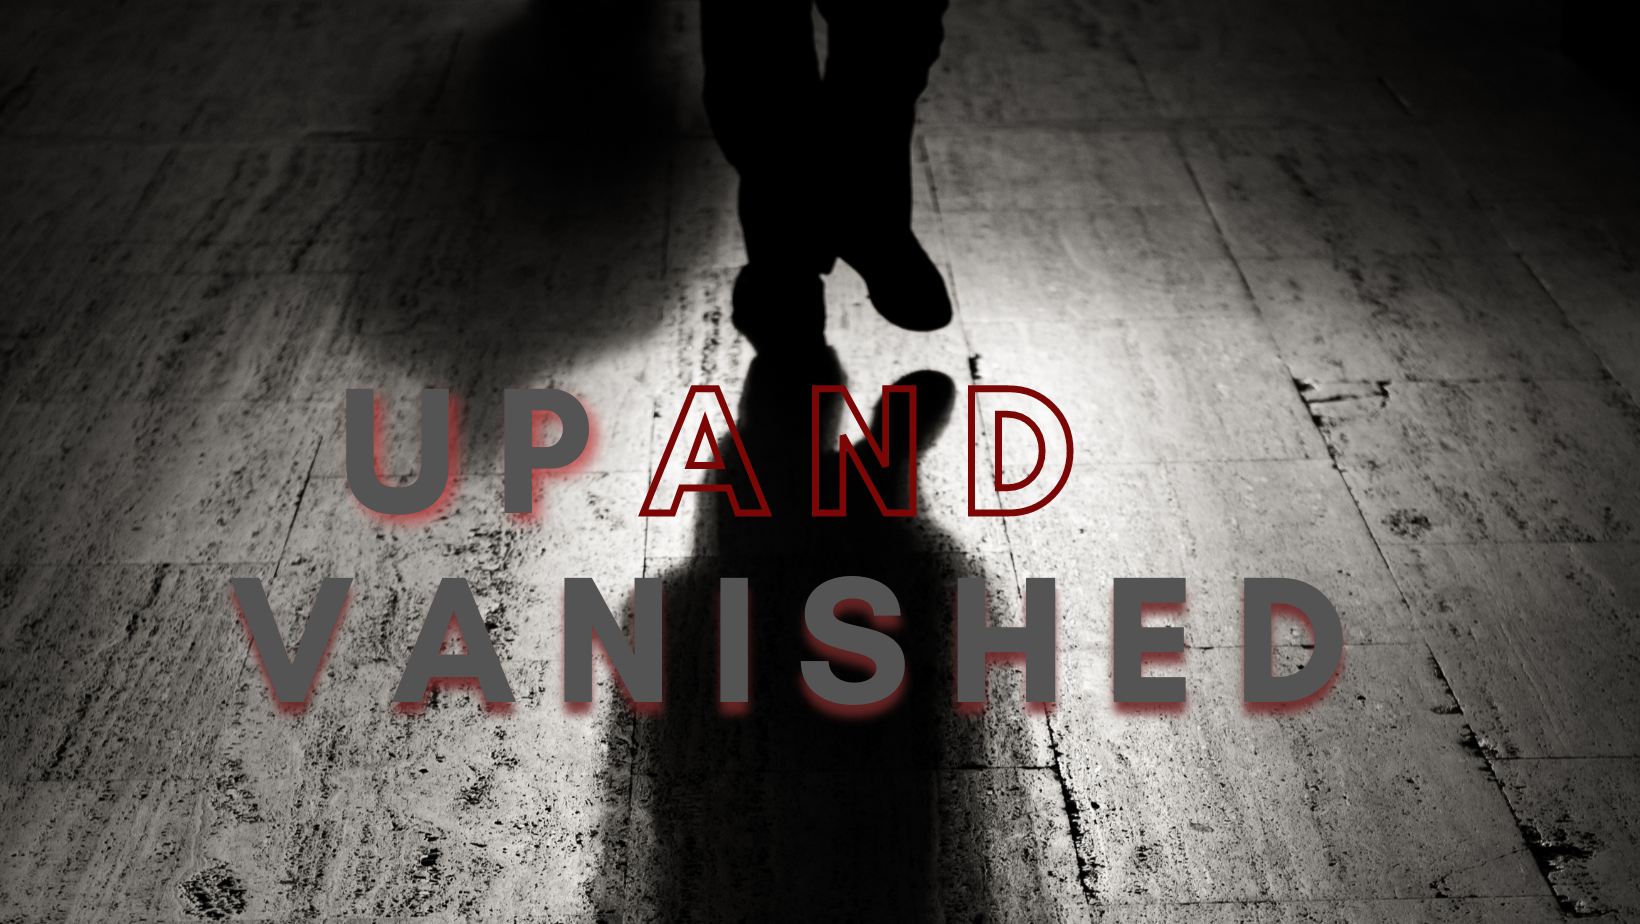 up and vanished podcast